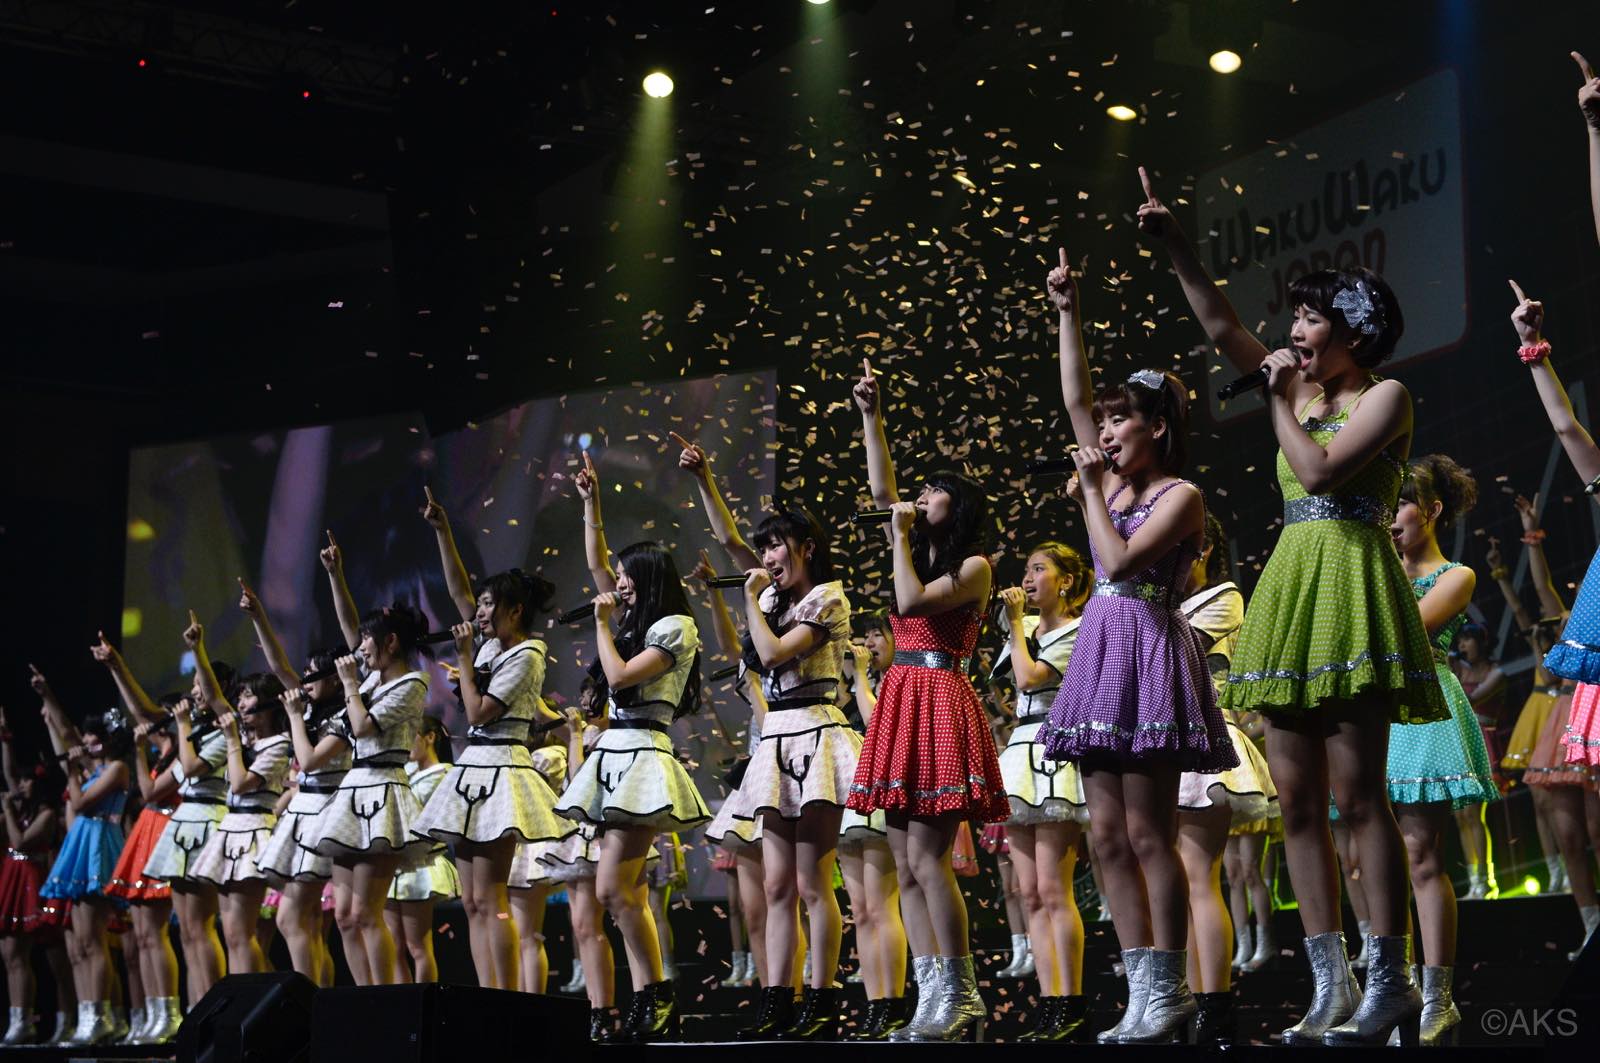 The Long-Awaited Reunion: AKB48 and JKT48 Join Hands for a Concert in Jakarta!